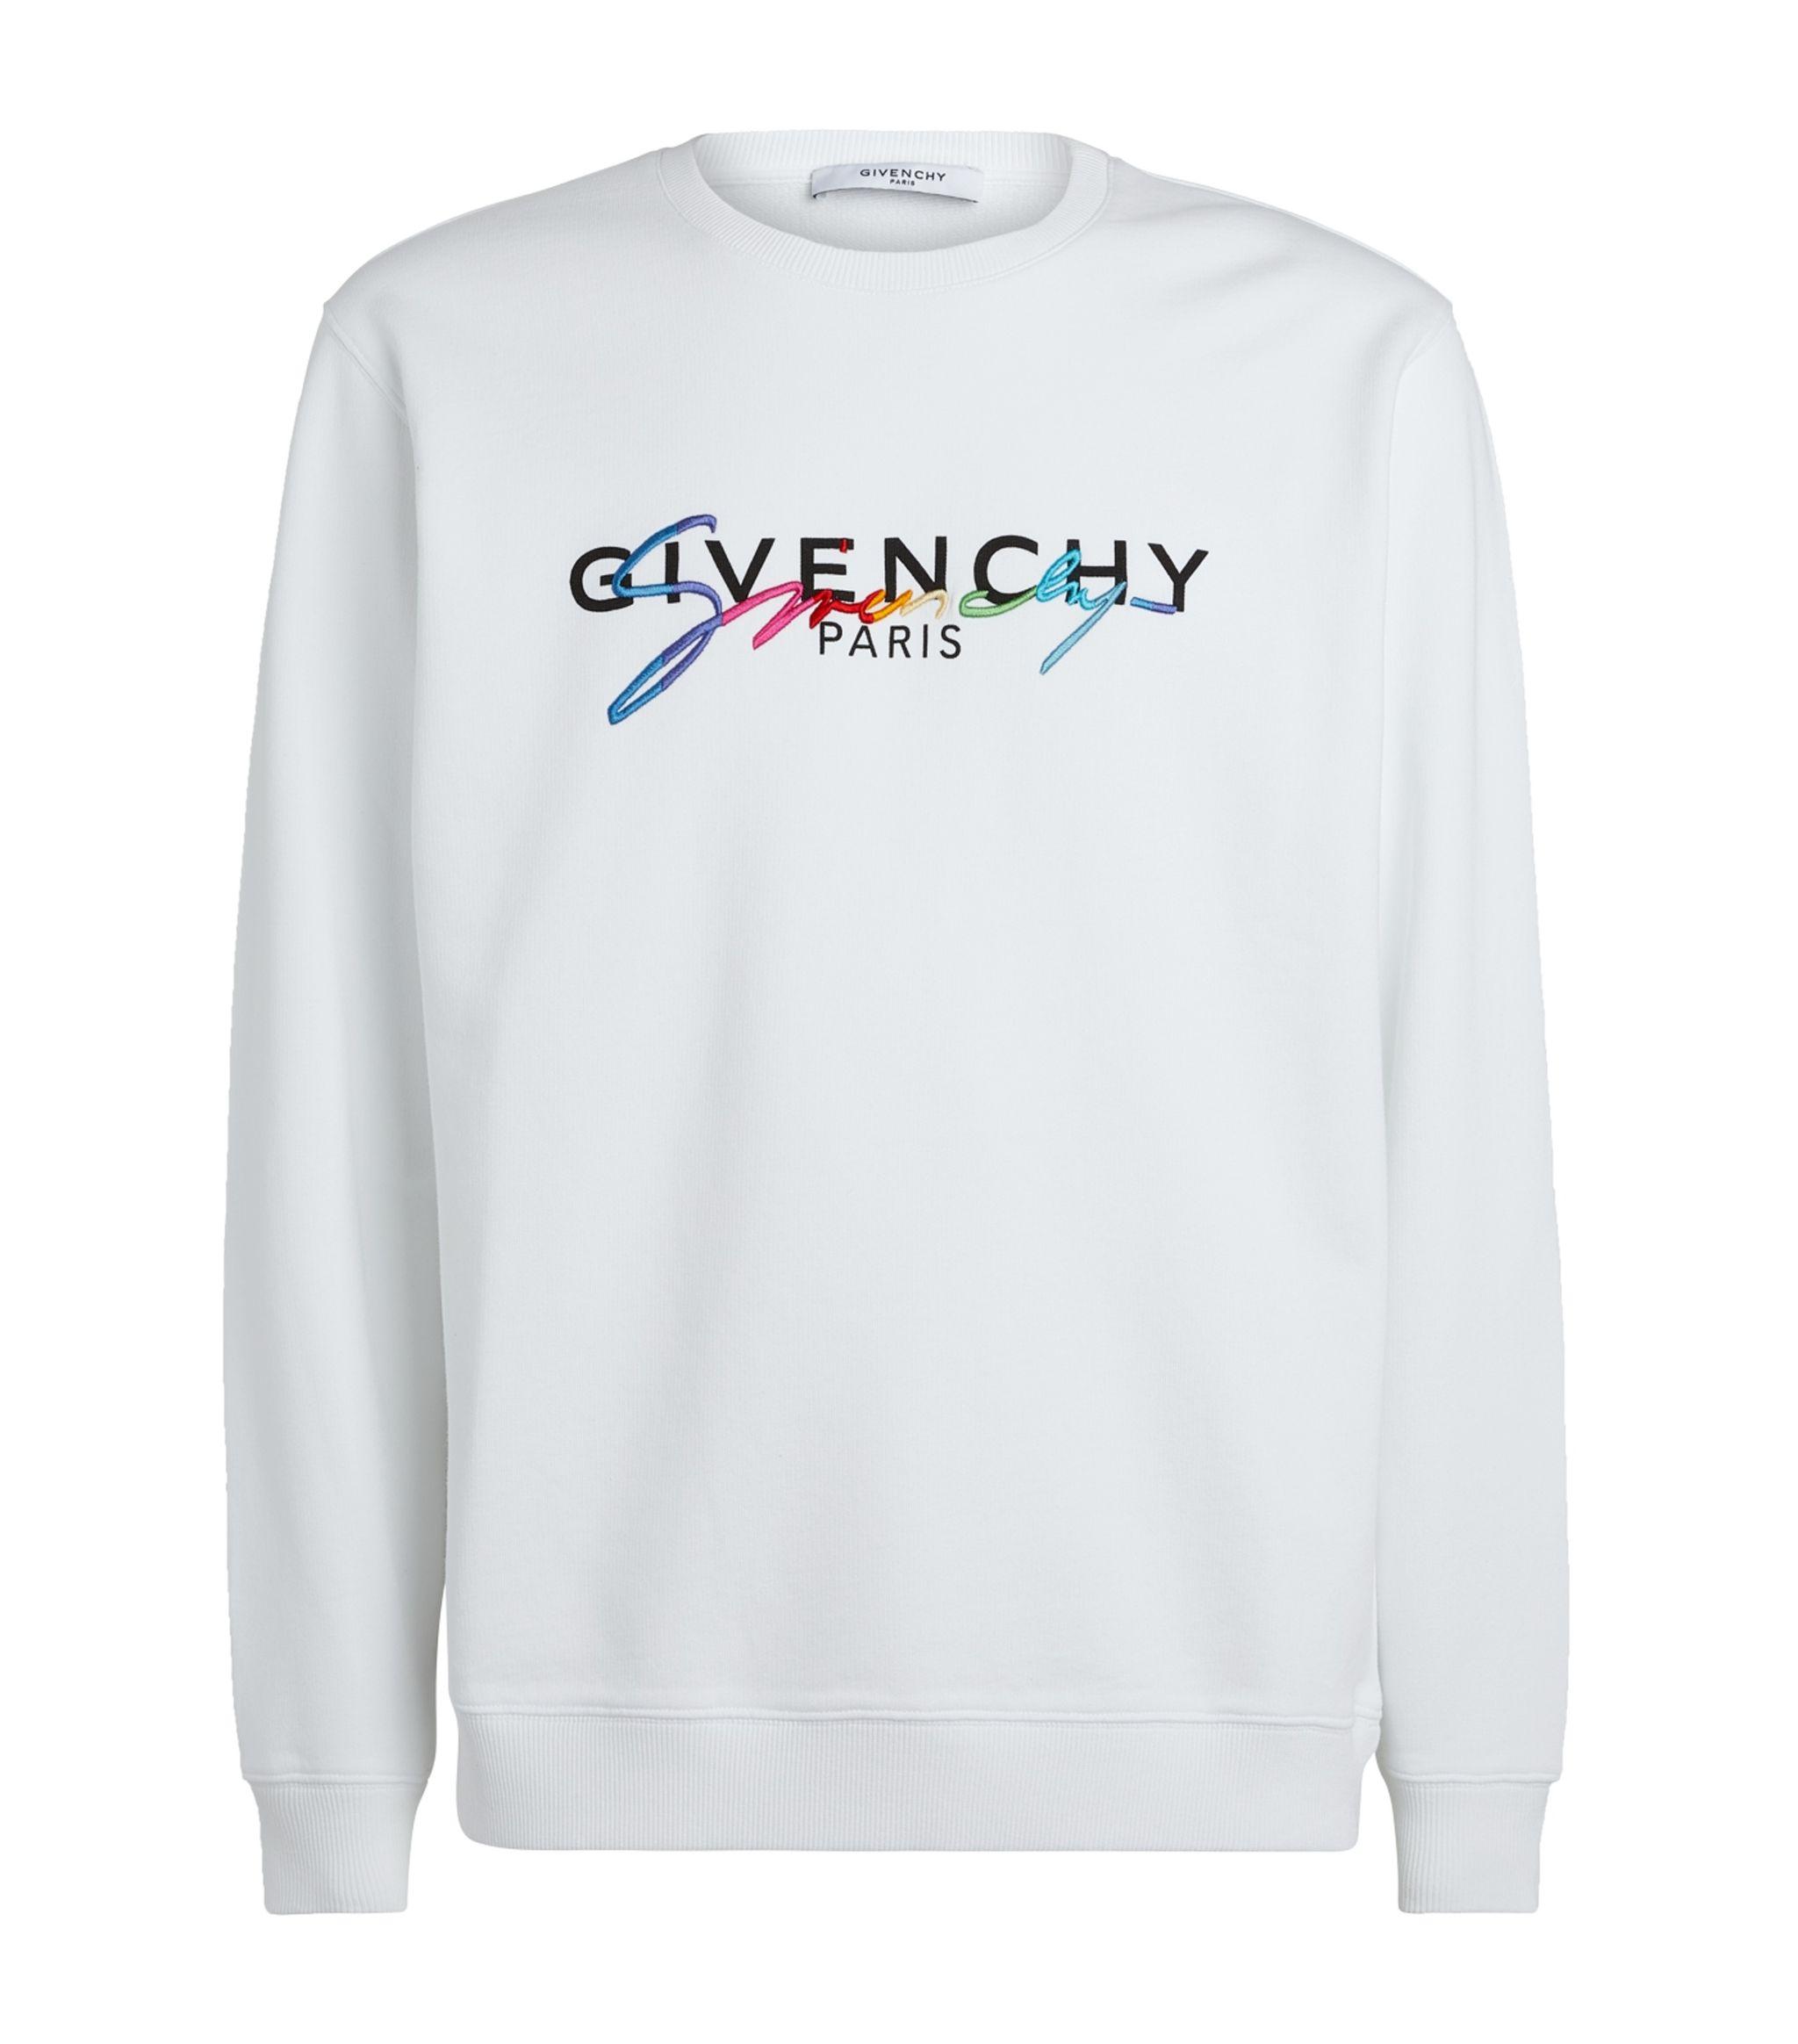 Givenchy Cotton Rainbow Signature Logo Sweatshirt in White for Men - Lyst